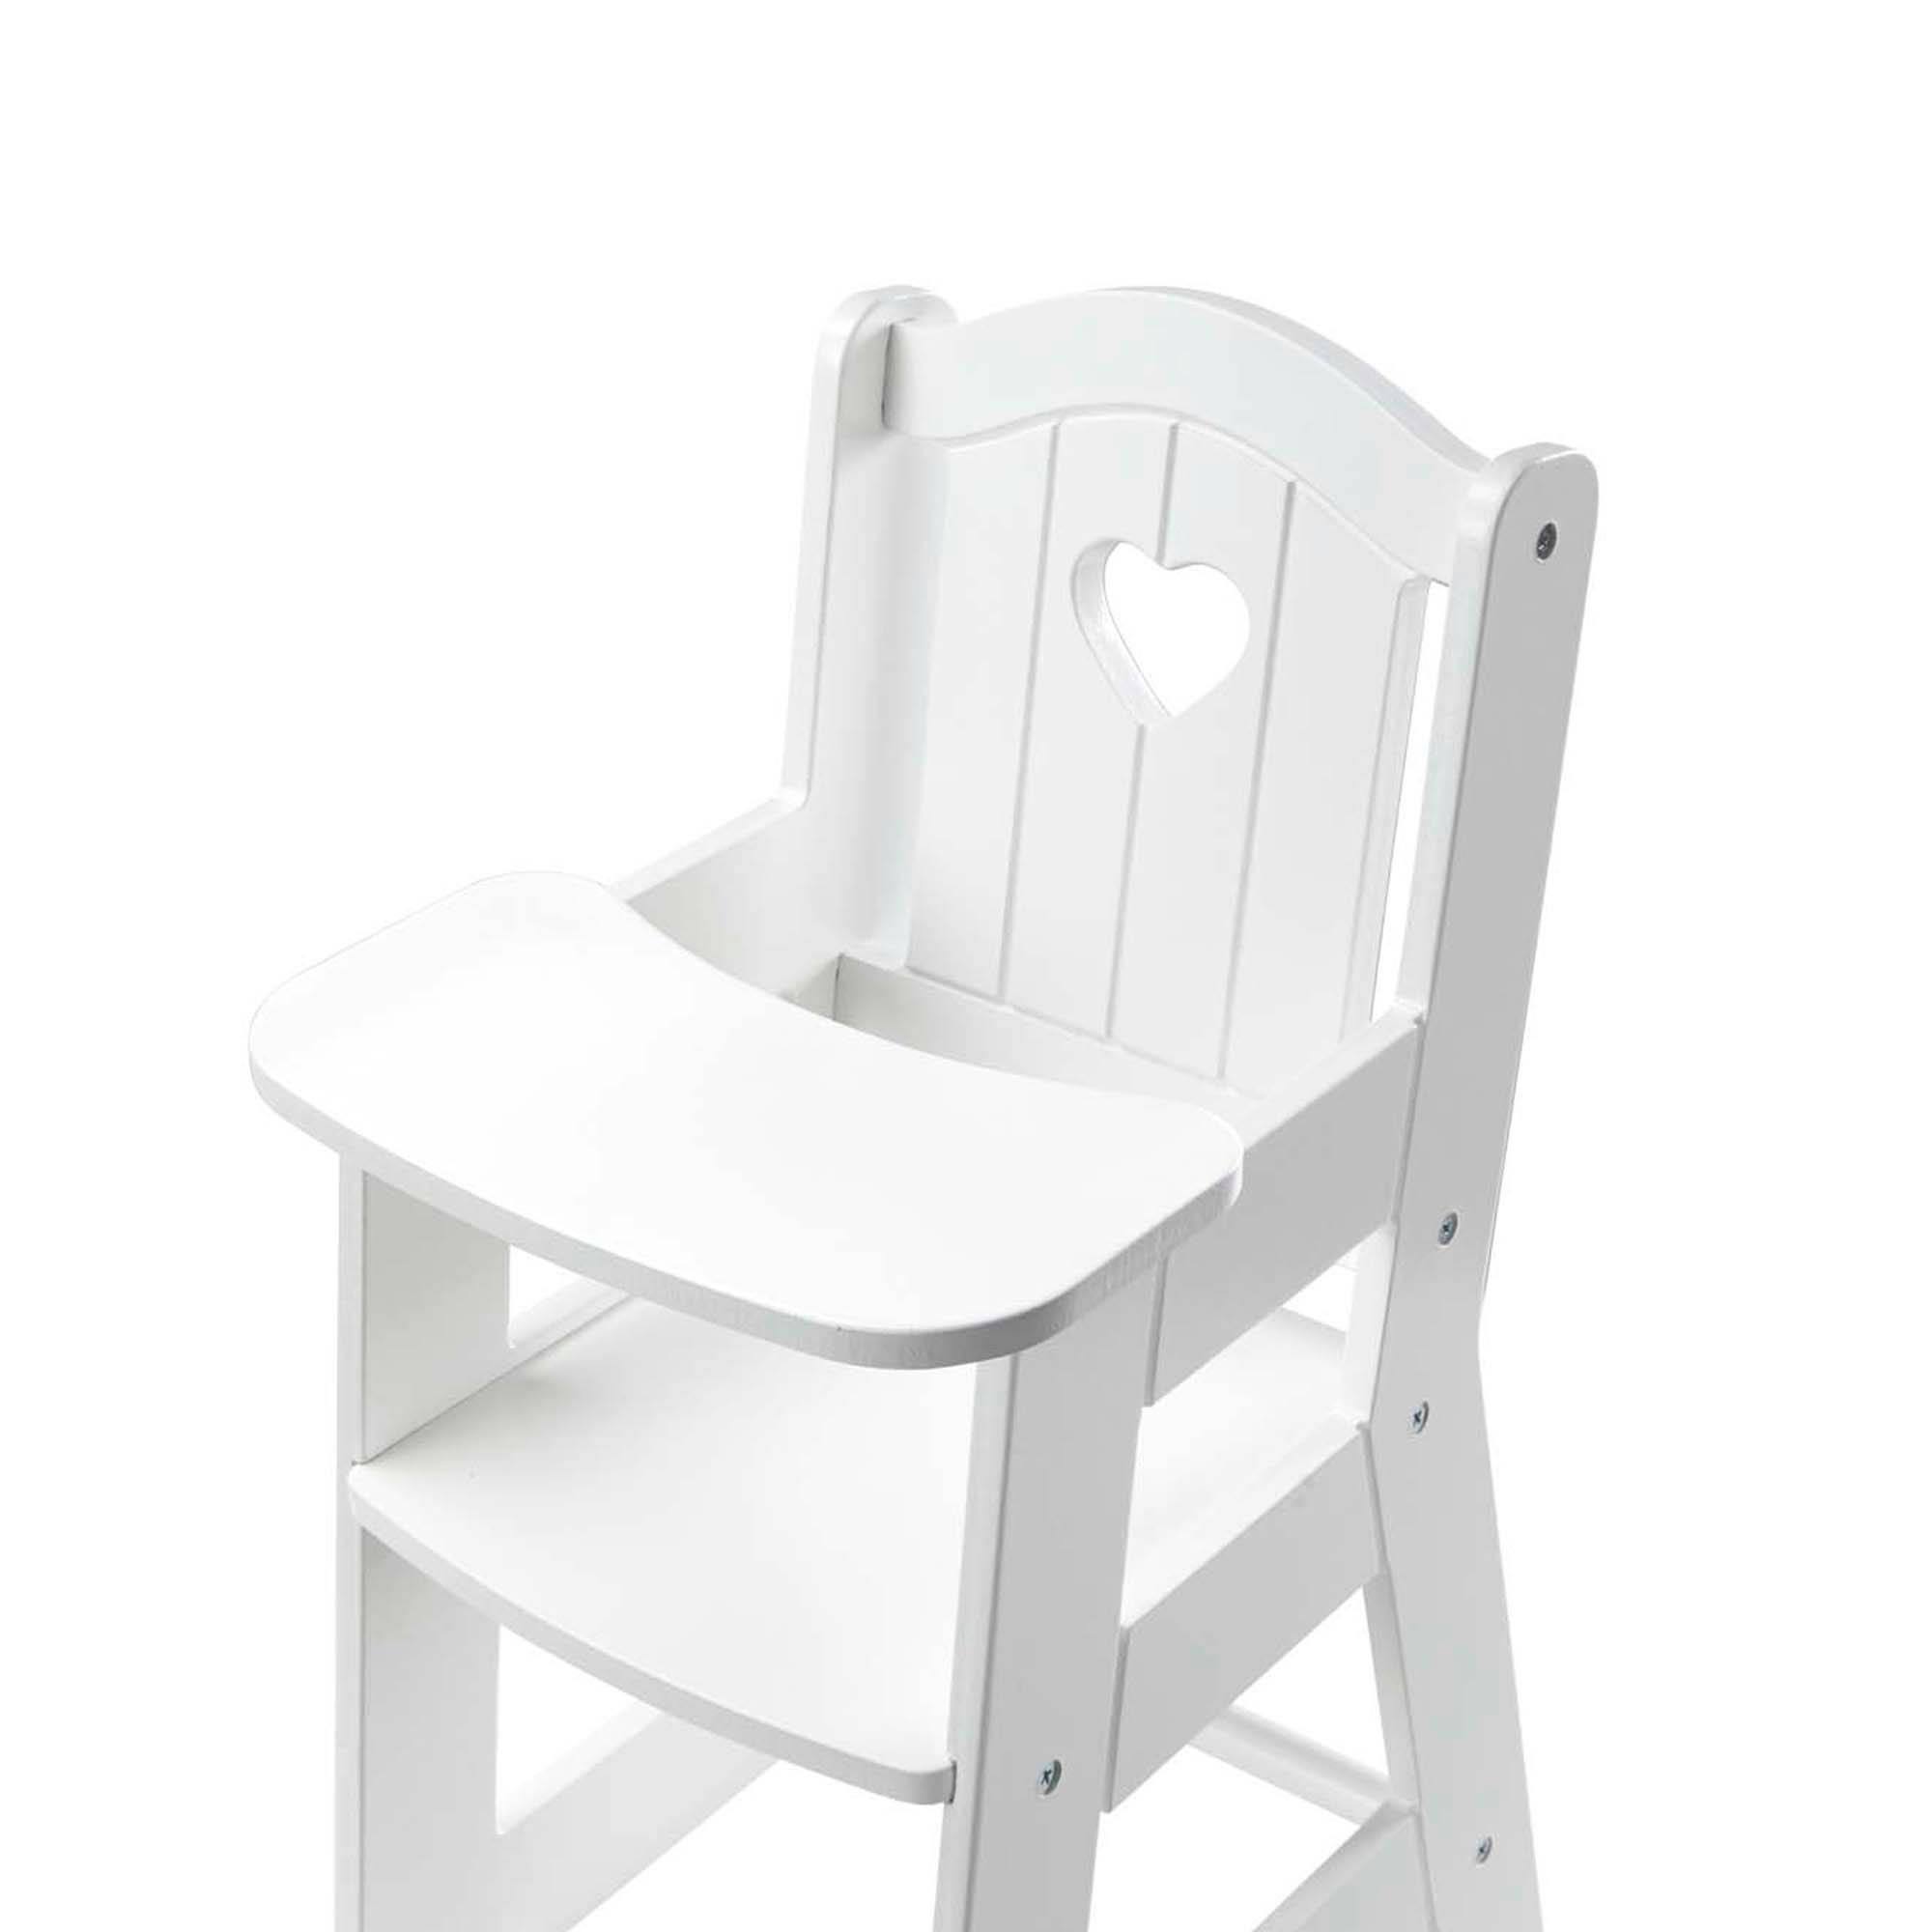 Melissa & Doug Mine to Love Wooden Play High Chair For Dolls, -stuffed Animals - White (18H x 8W x 11D Assembled)